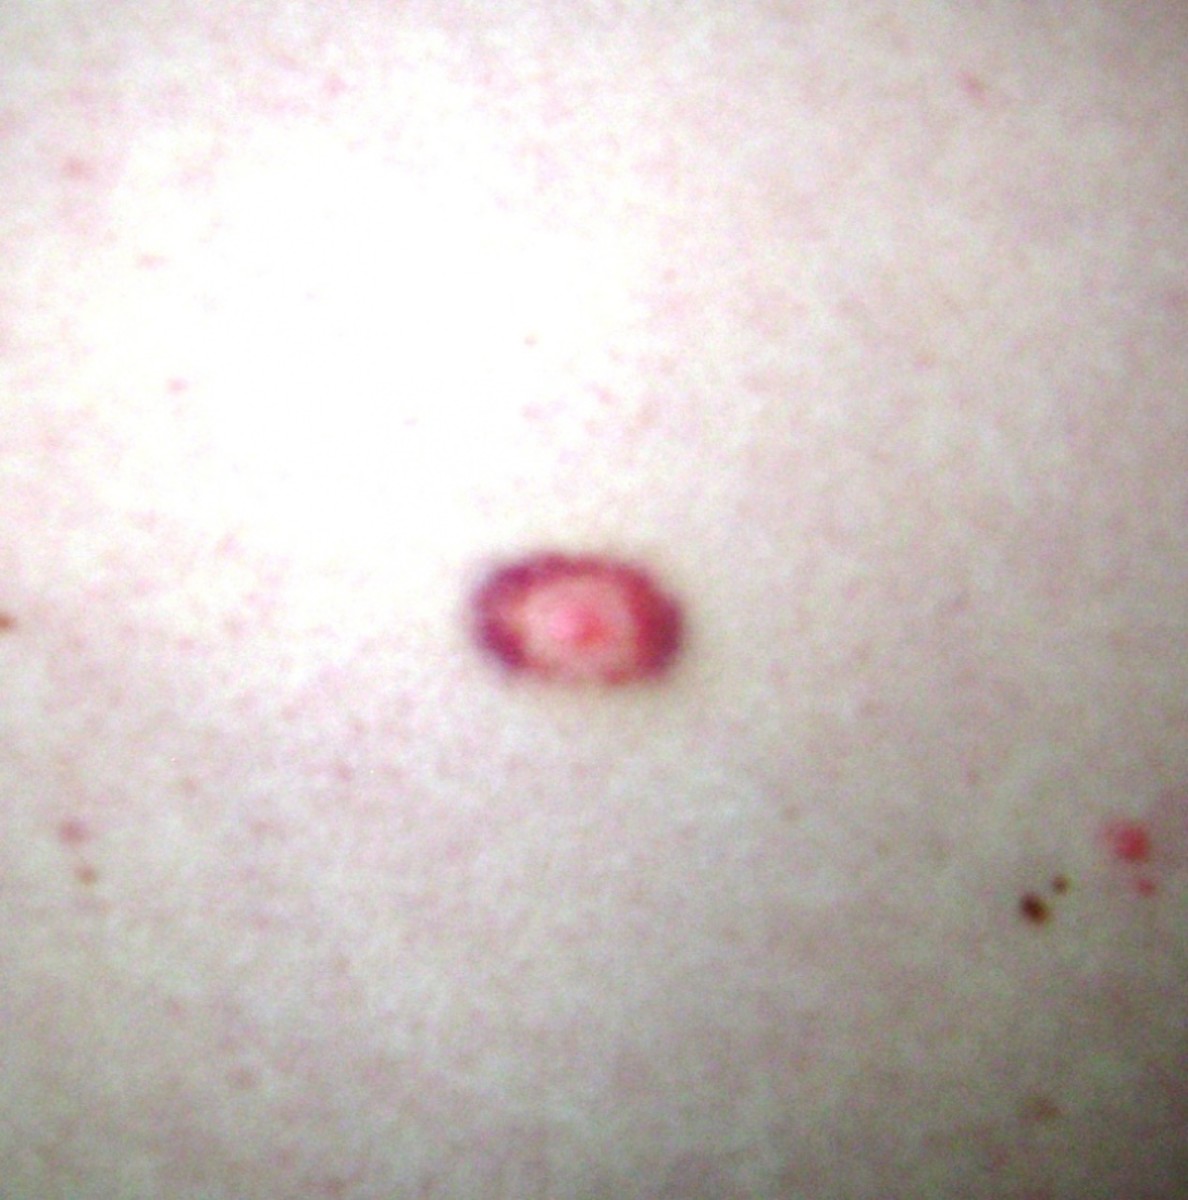 An example of a bulls eye rash on an individual in SW AR taken in October, 2011.  